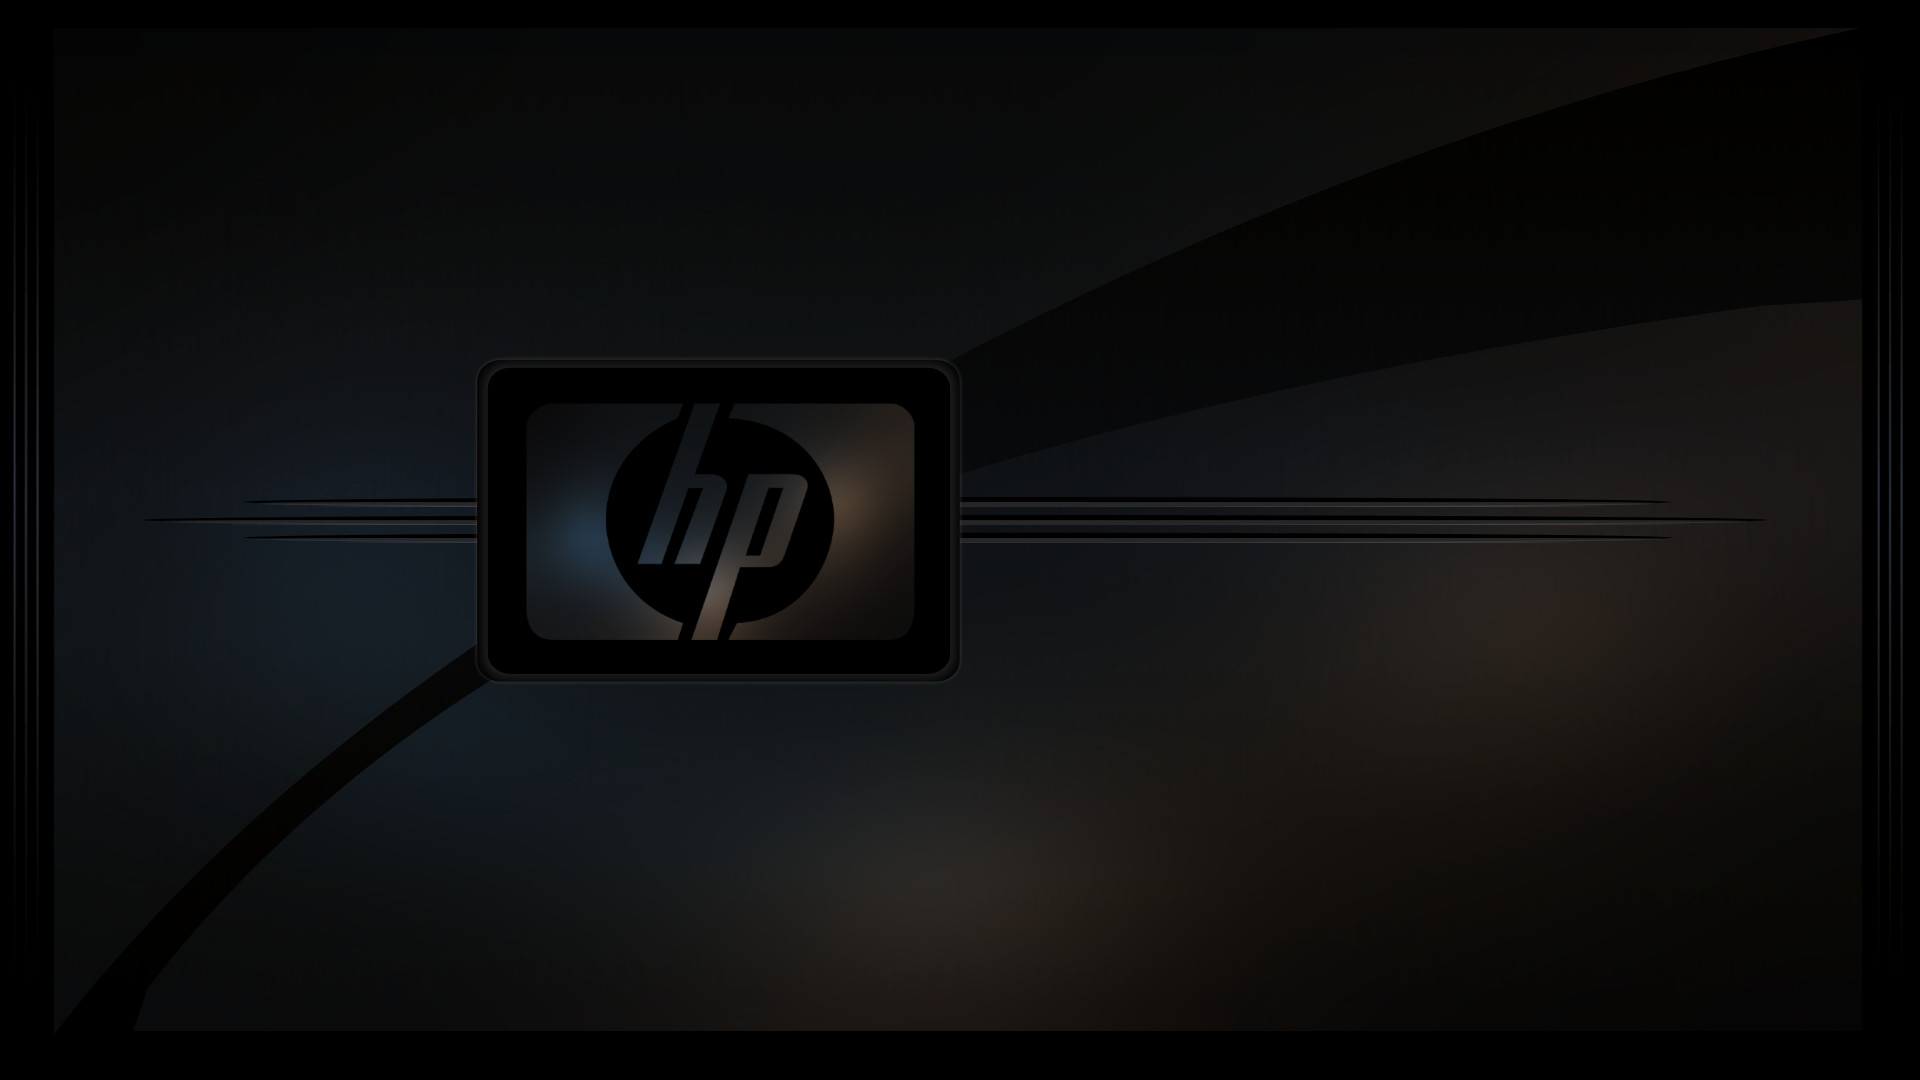  HP  Wallpaper  HD 66 pictures 